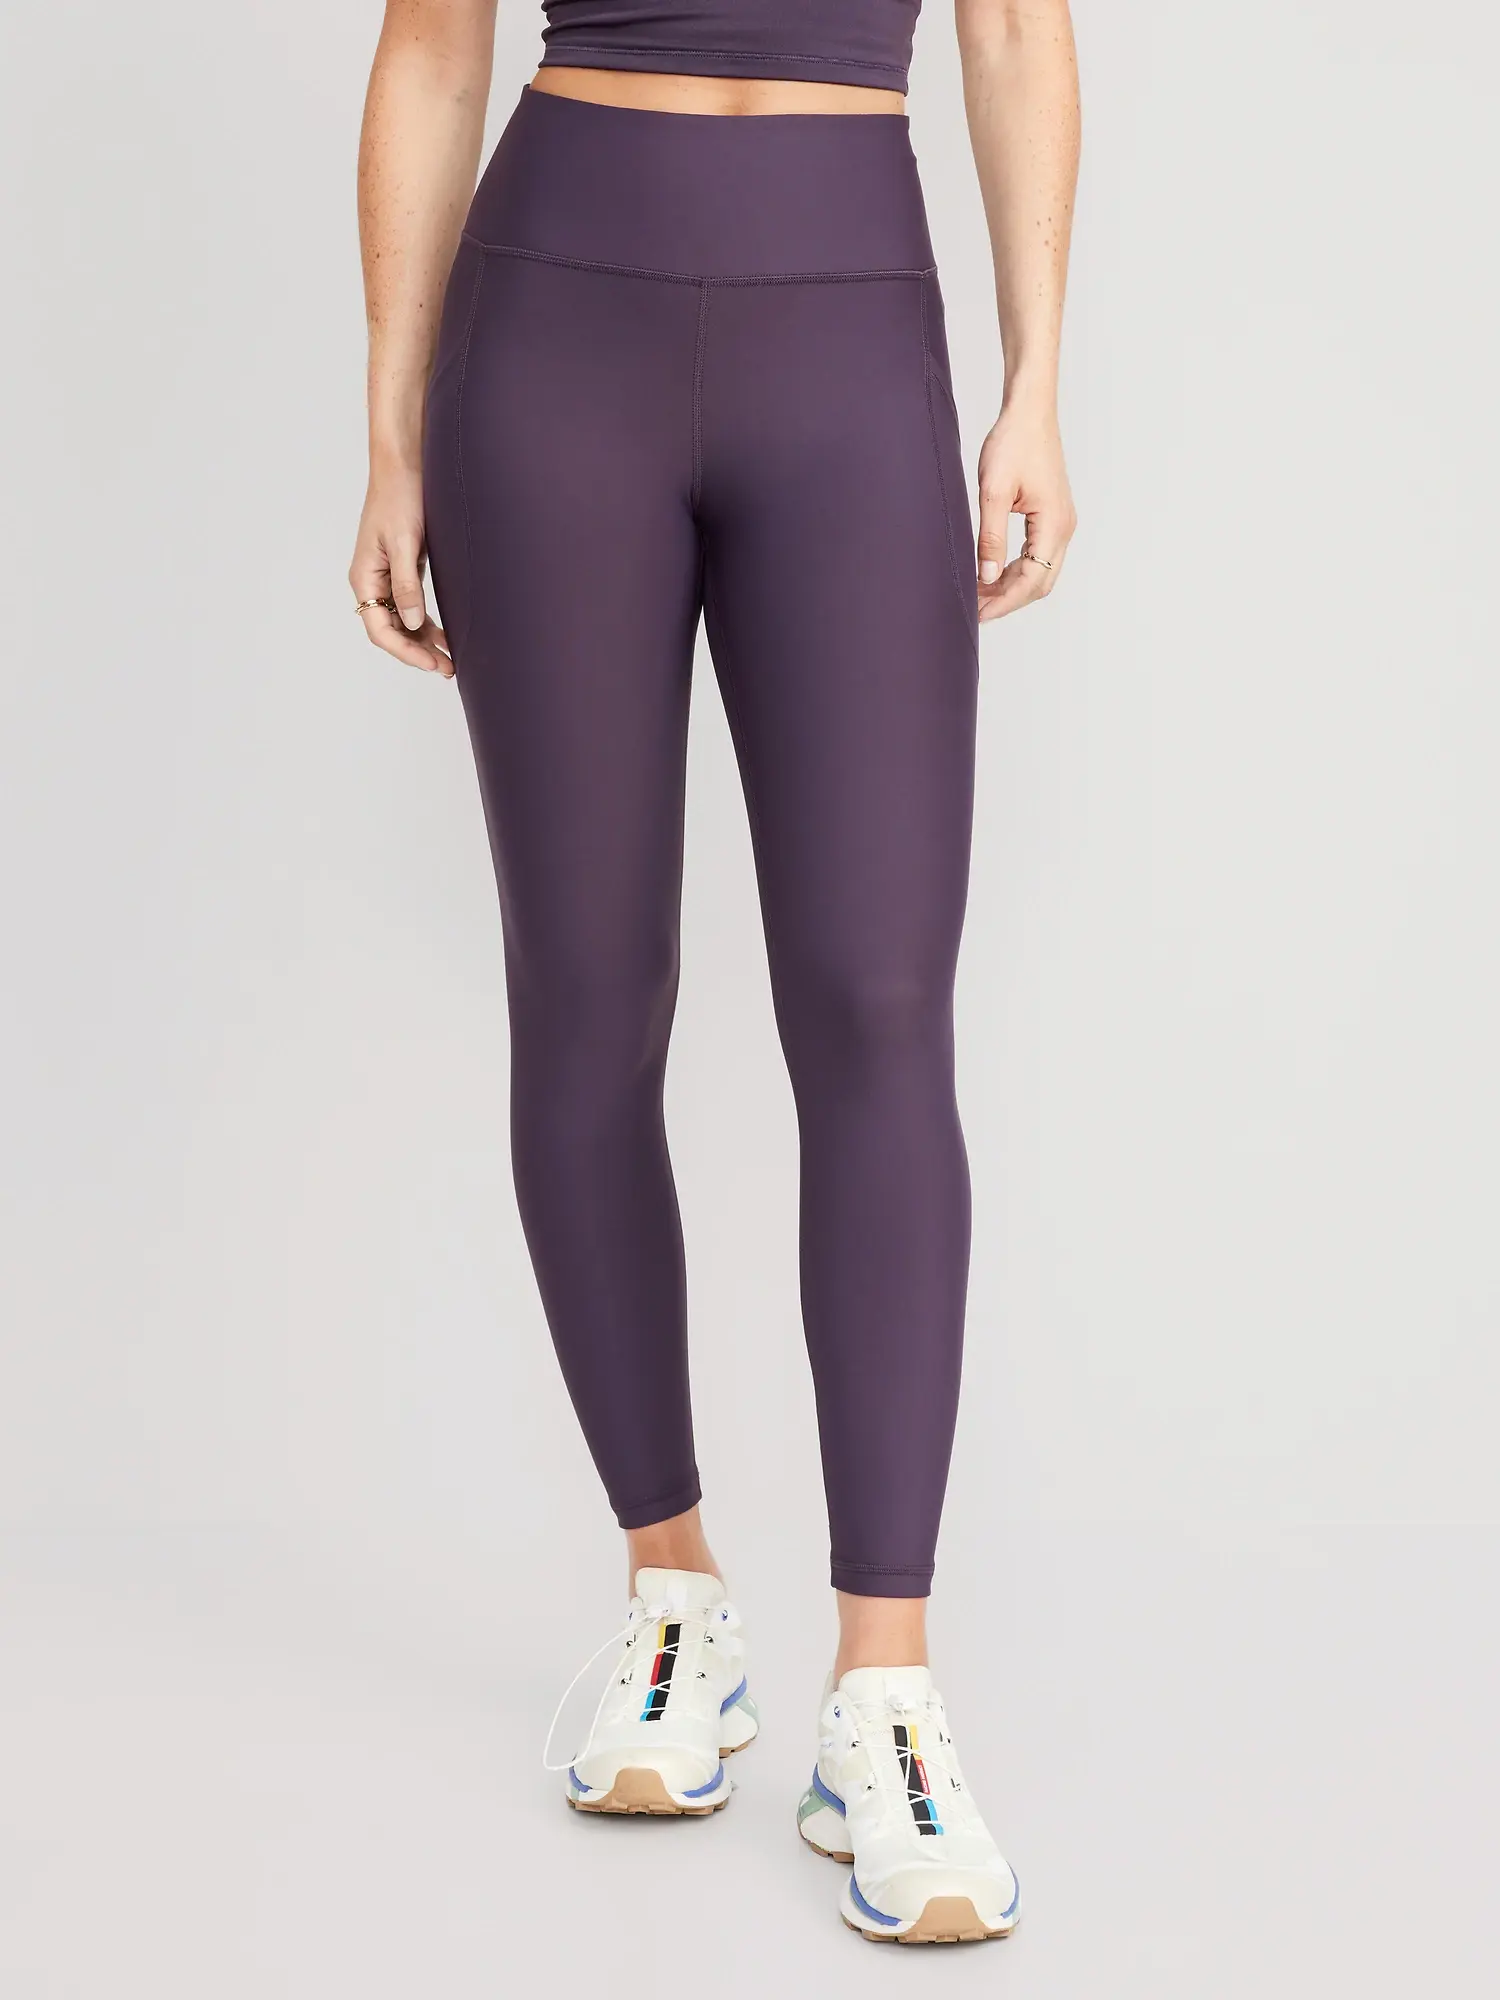 Old Navy - High-Waisted PowerSoft 7/8 Leggings for Women purple